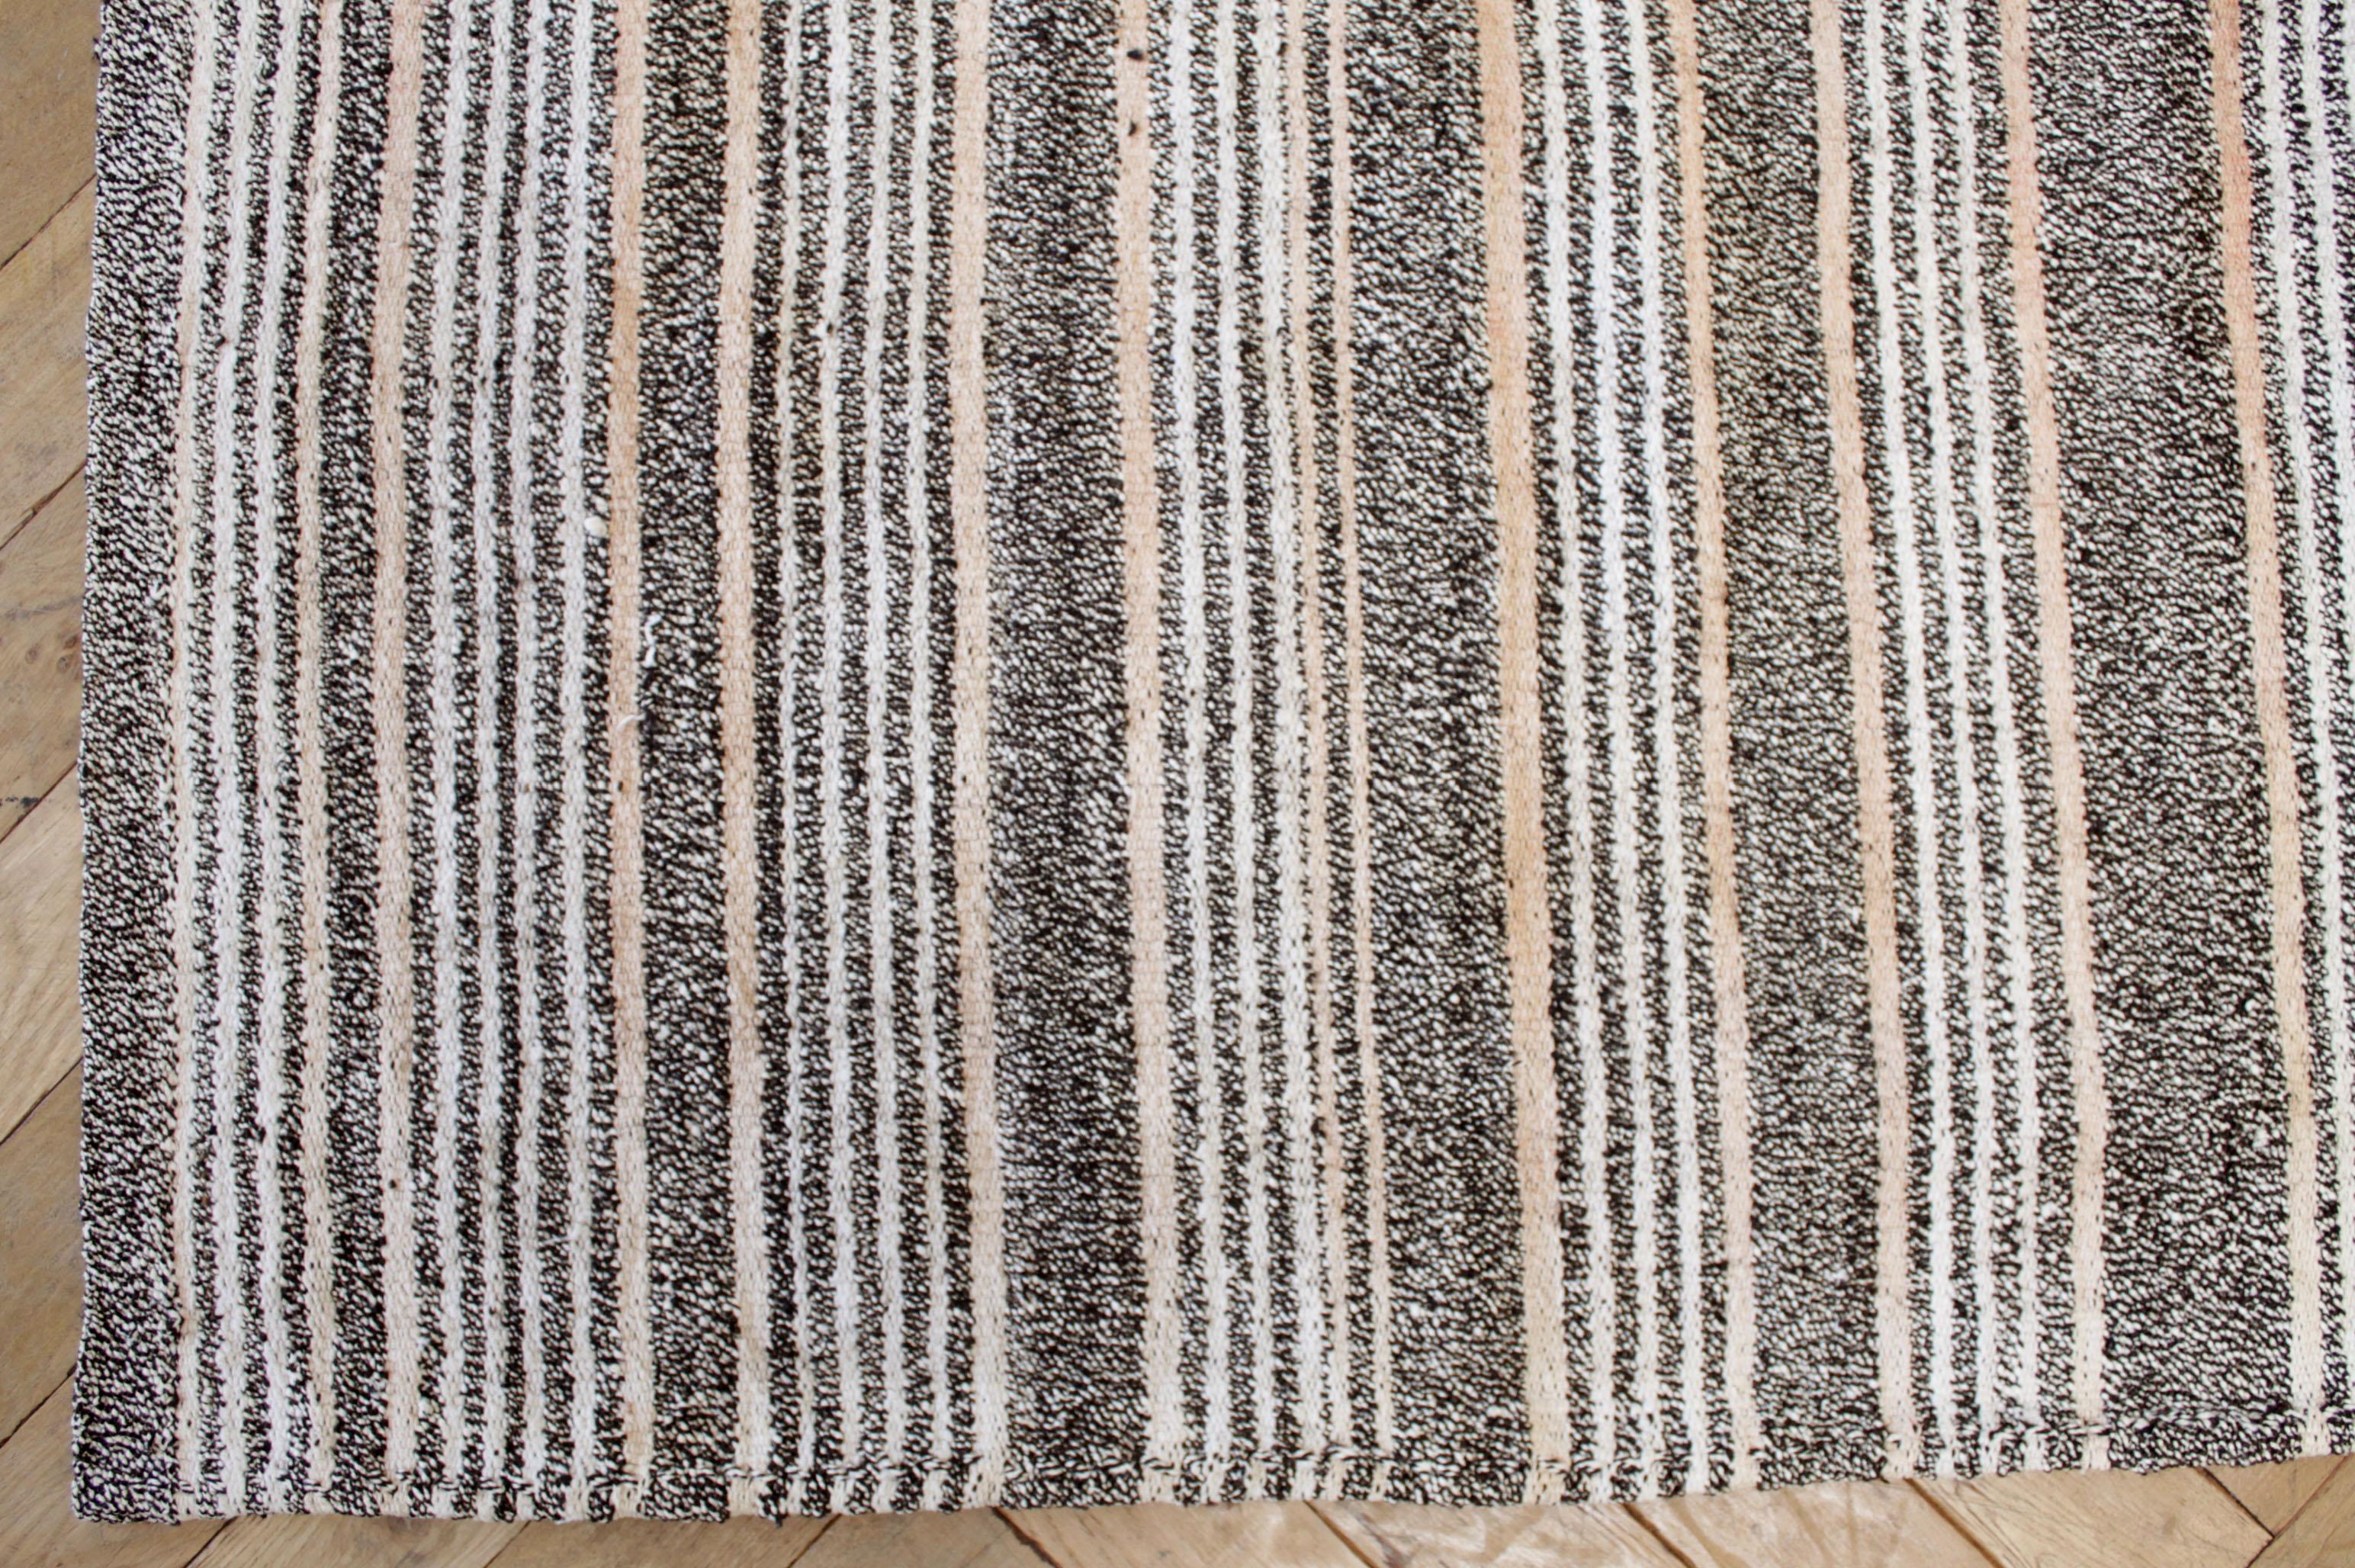 Ramy rug
Vintage Turkish rug in brown with white weave and creamy white stripes, with dark brown stripes, with subtle shades of a light coral color stripe.
   
Flat-weave, wool and goat hair, make these extremely durable with great use for high